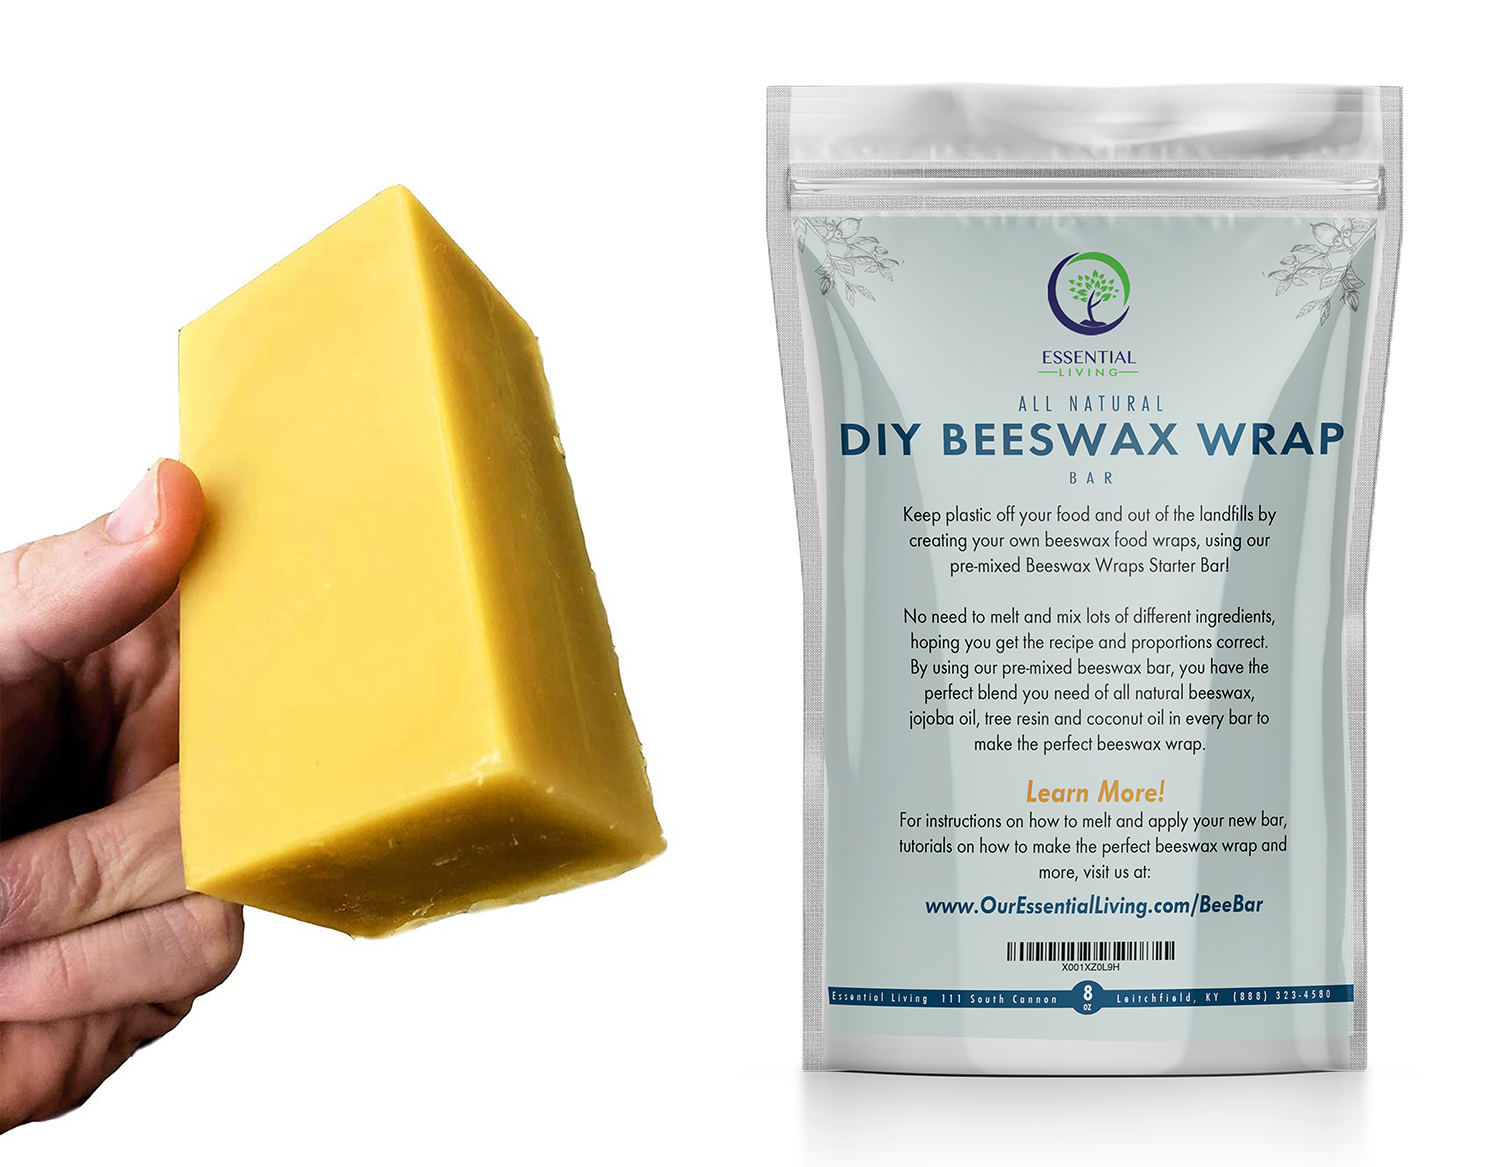 Beeswax Drops to Make Beeswax Wraps No Grating Required with Tree Resin and Organic Coconut Oil Makes up to 12 Beeswax Wraps or 1sqm of Fabric. 